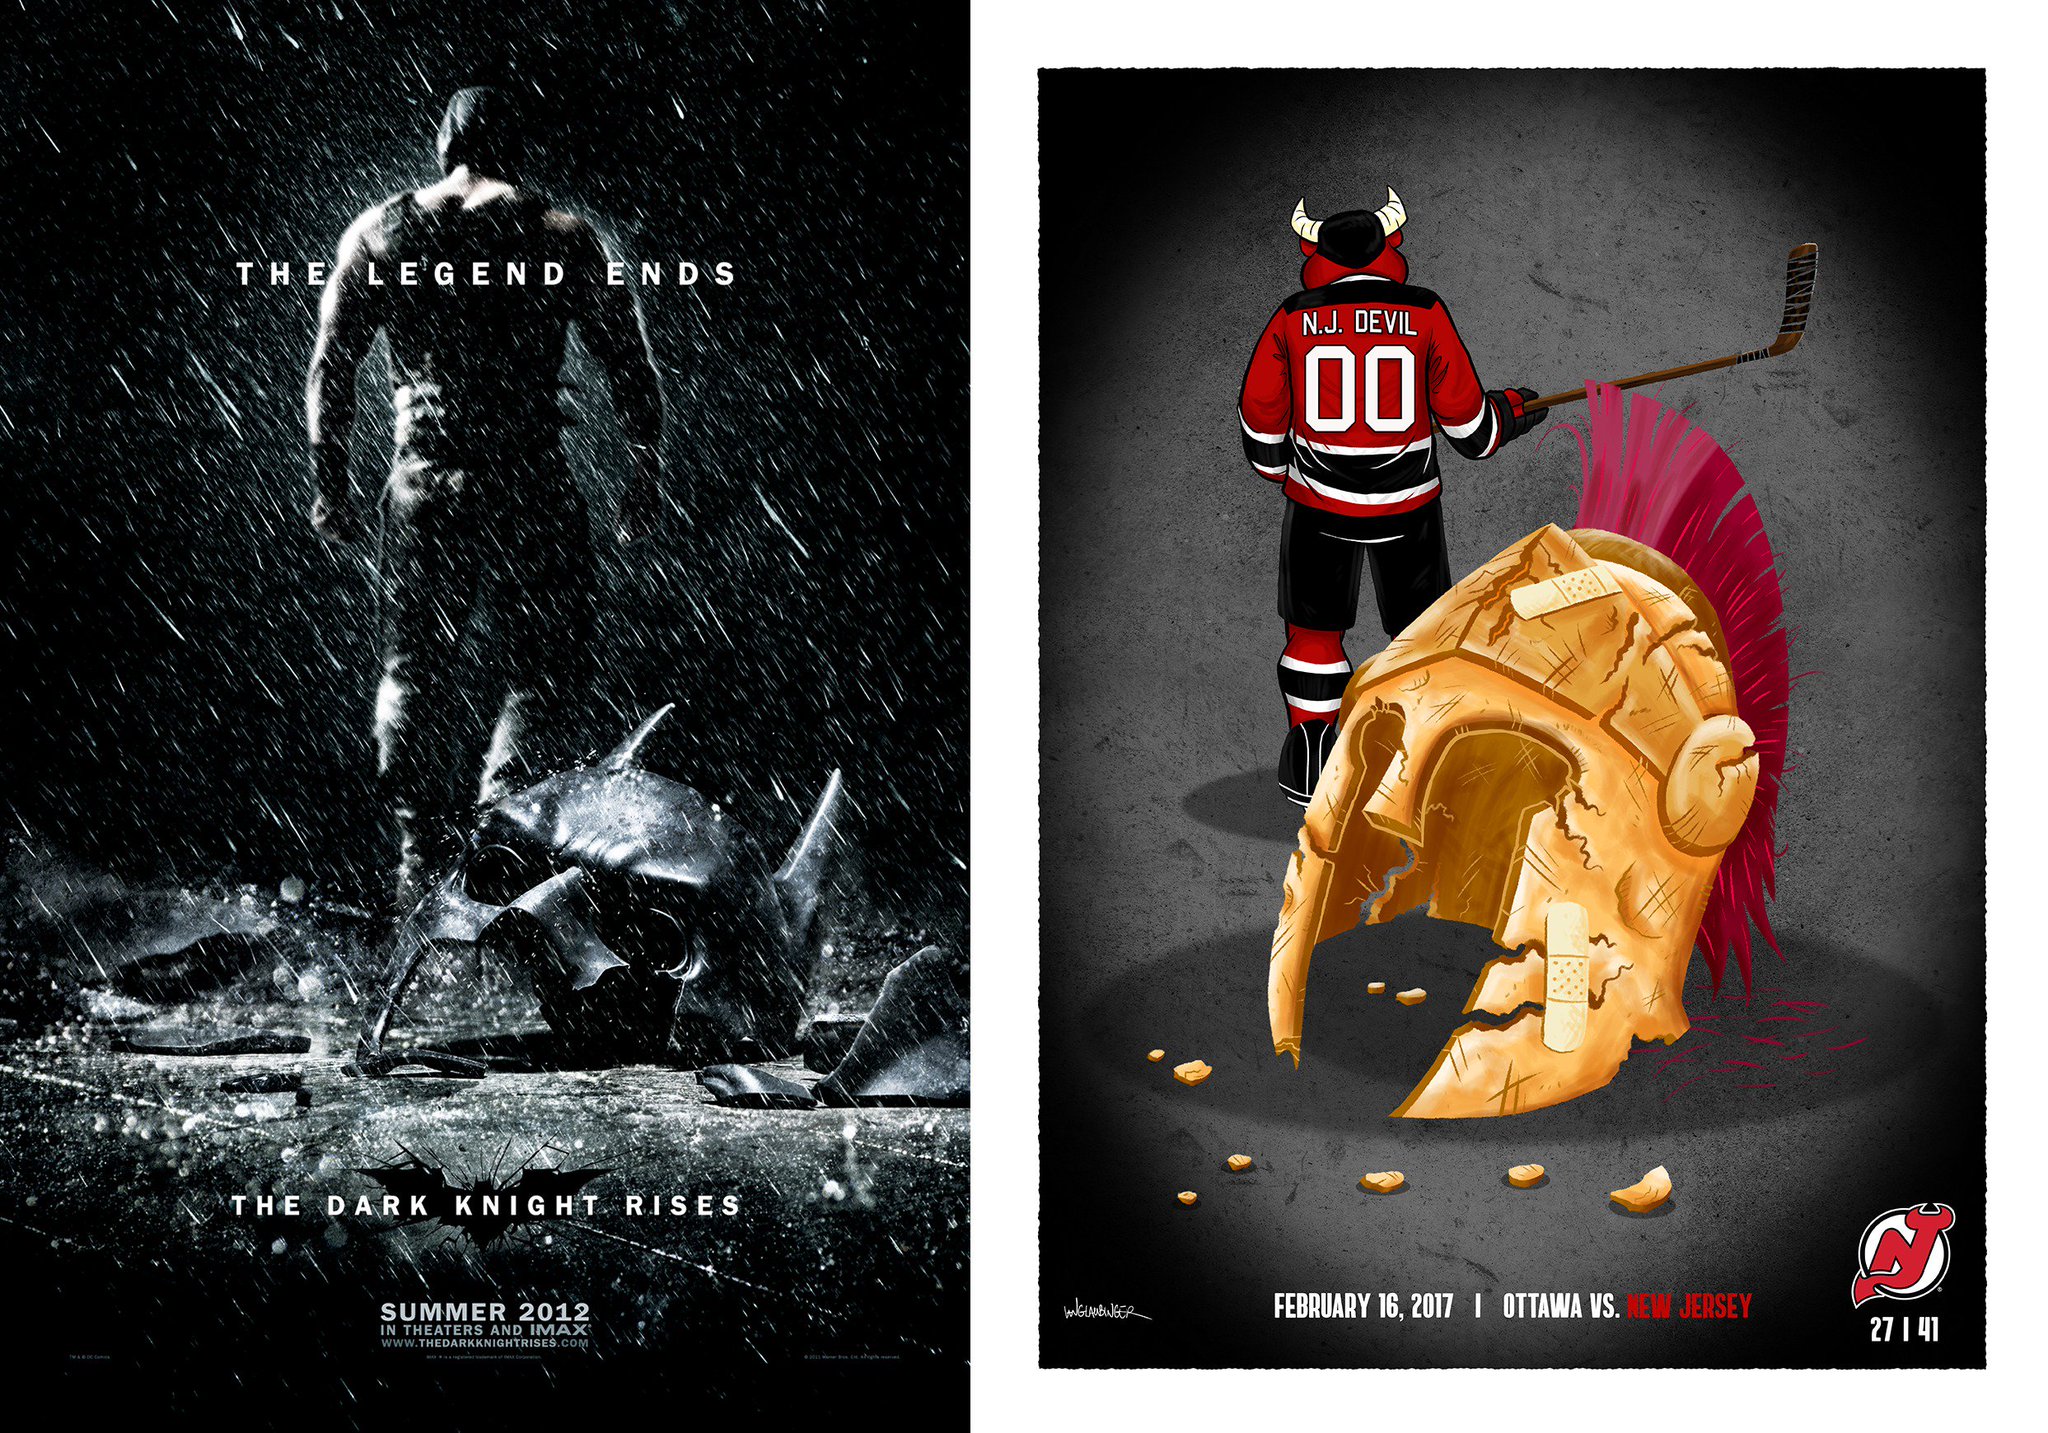 new jersey devils game day posters